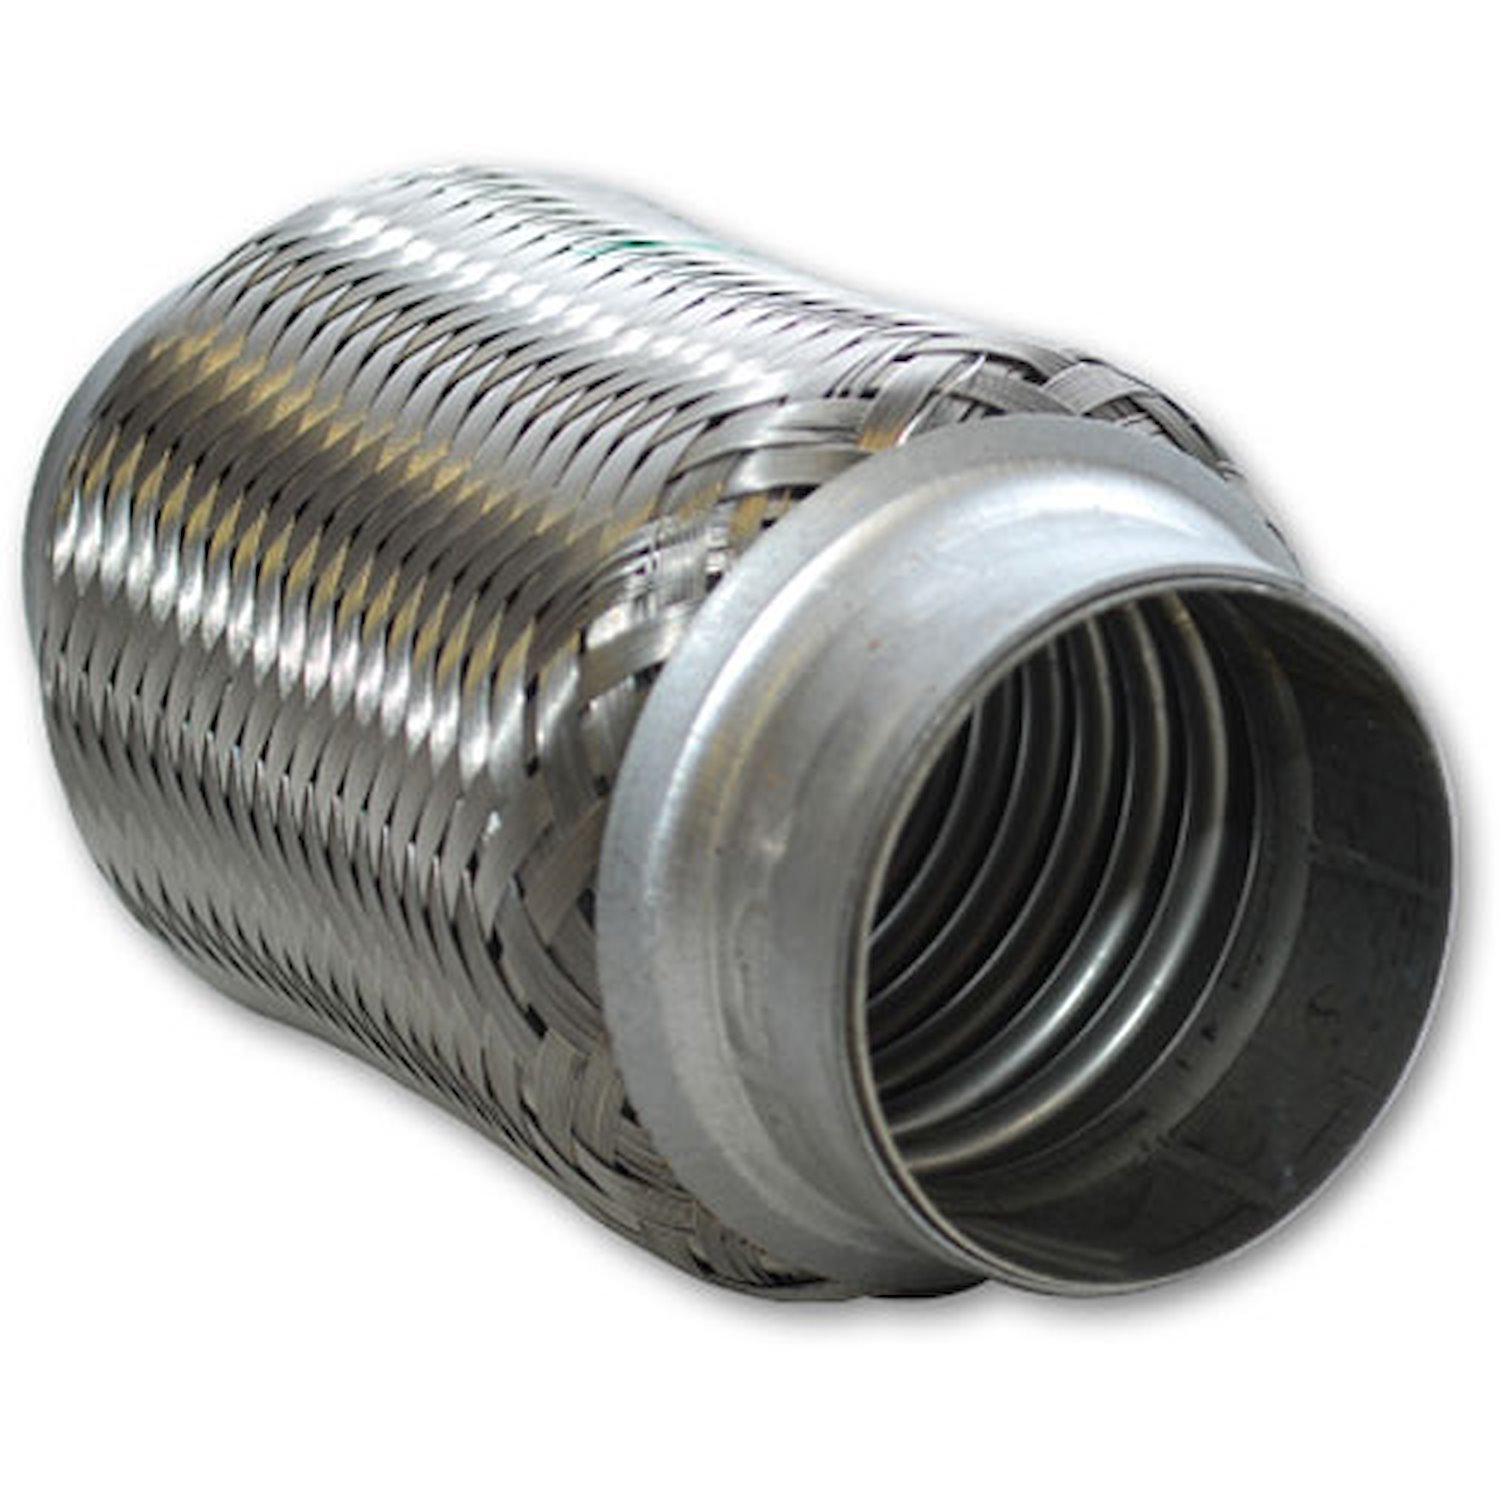 Standard Flex Coupling Without Inner Liner 1.75" Inlet/Outlet Diamater